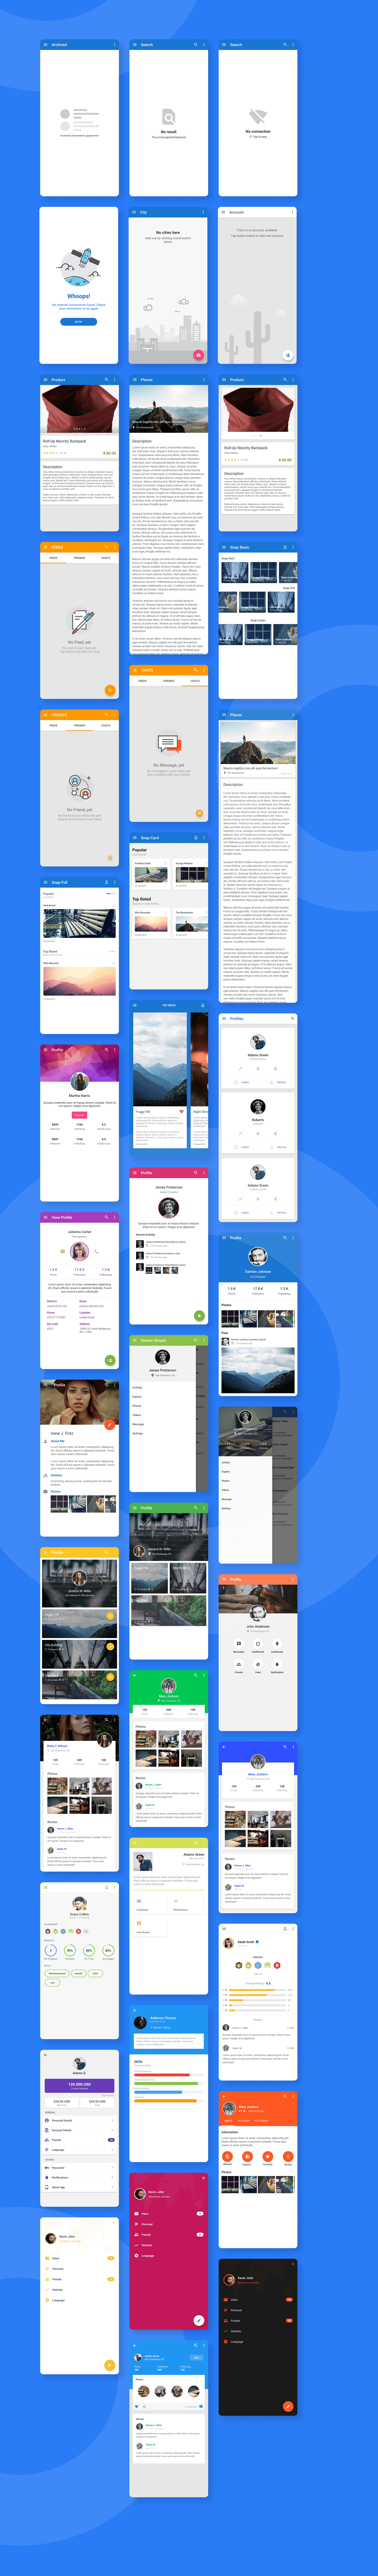 MaterialX - Android Material Design UI Components 2.7 - 24